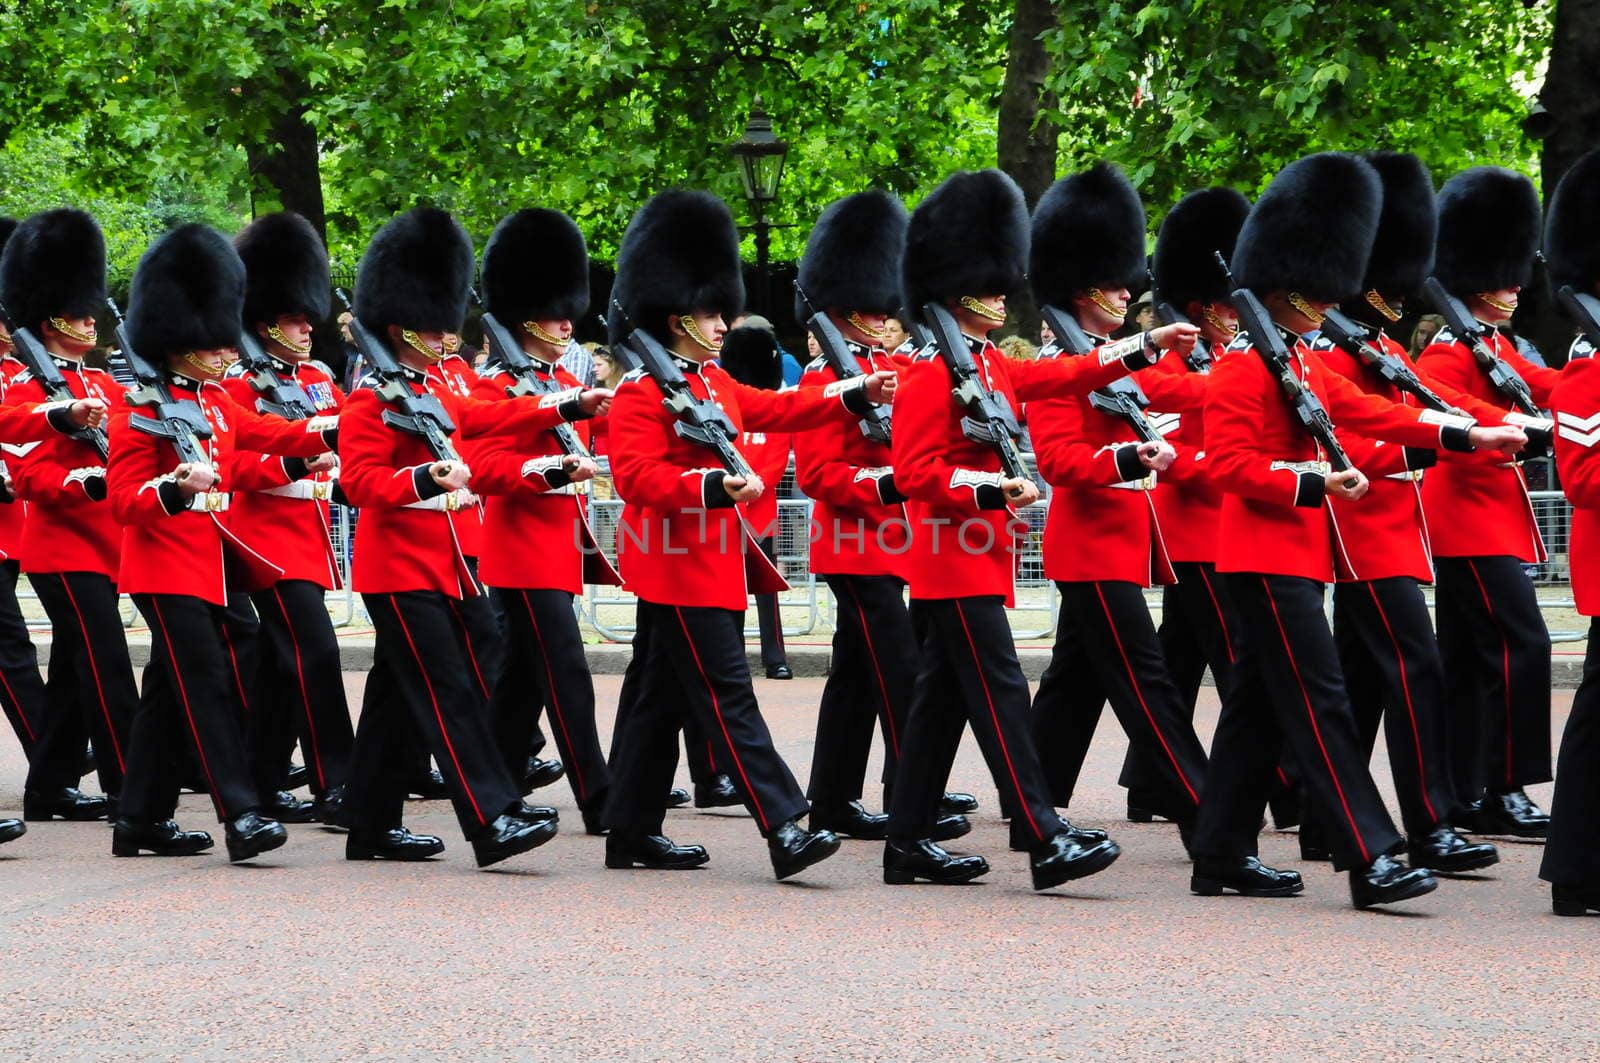 Grenadier guards marching on parade